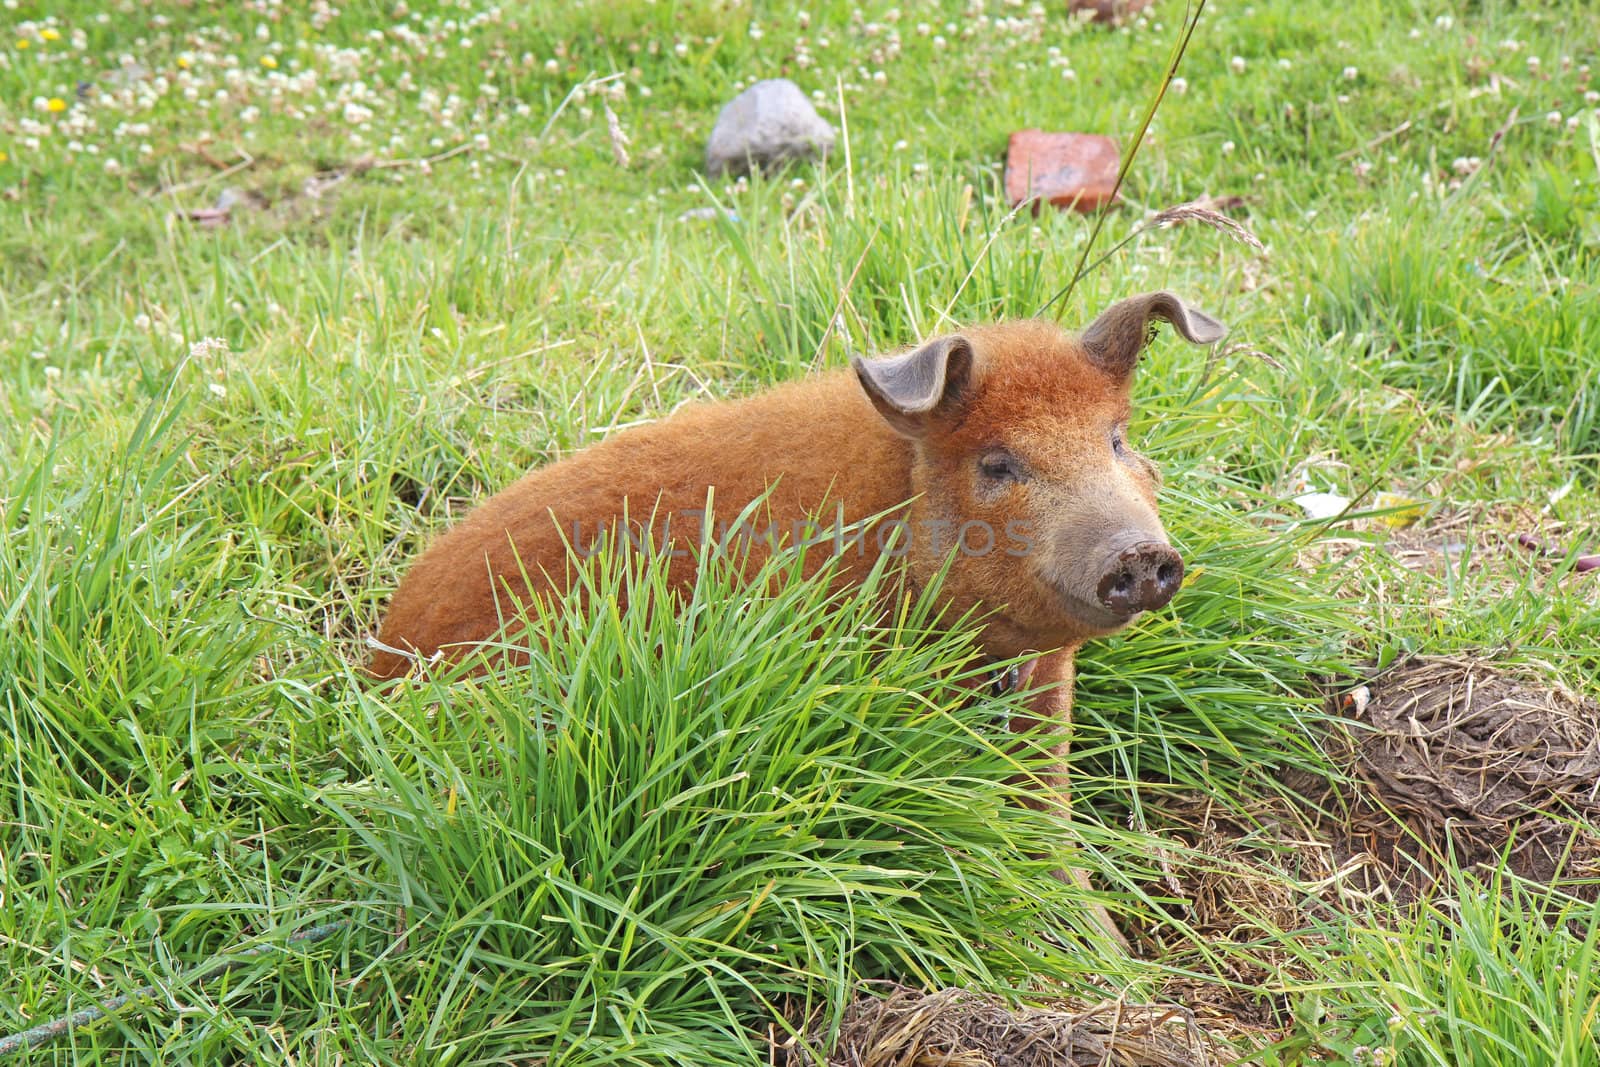 A red domestic pig (Sus scrofa domesticus) sits in a field by the side of a road near Quito in the highlands of Ecuador